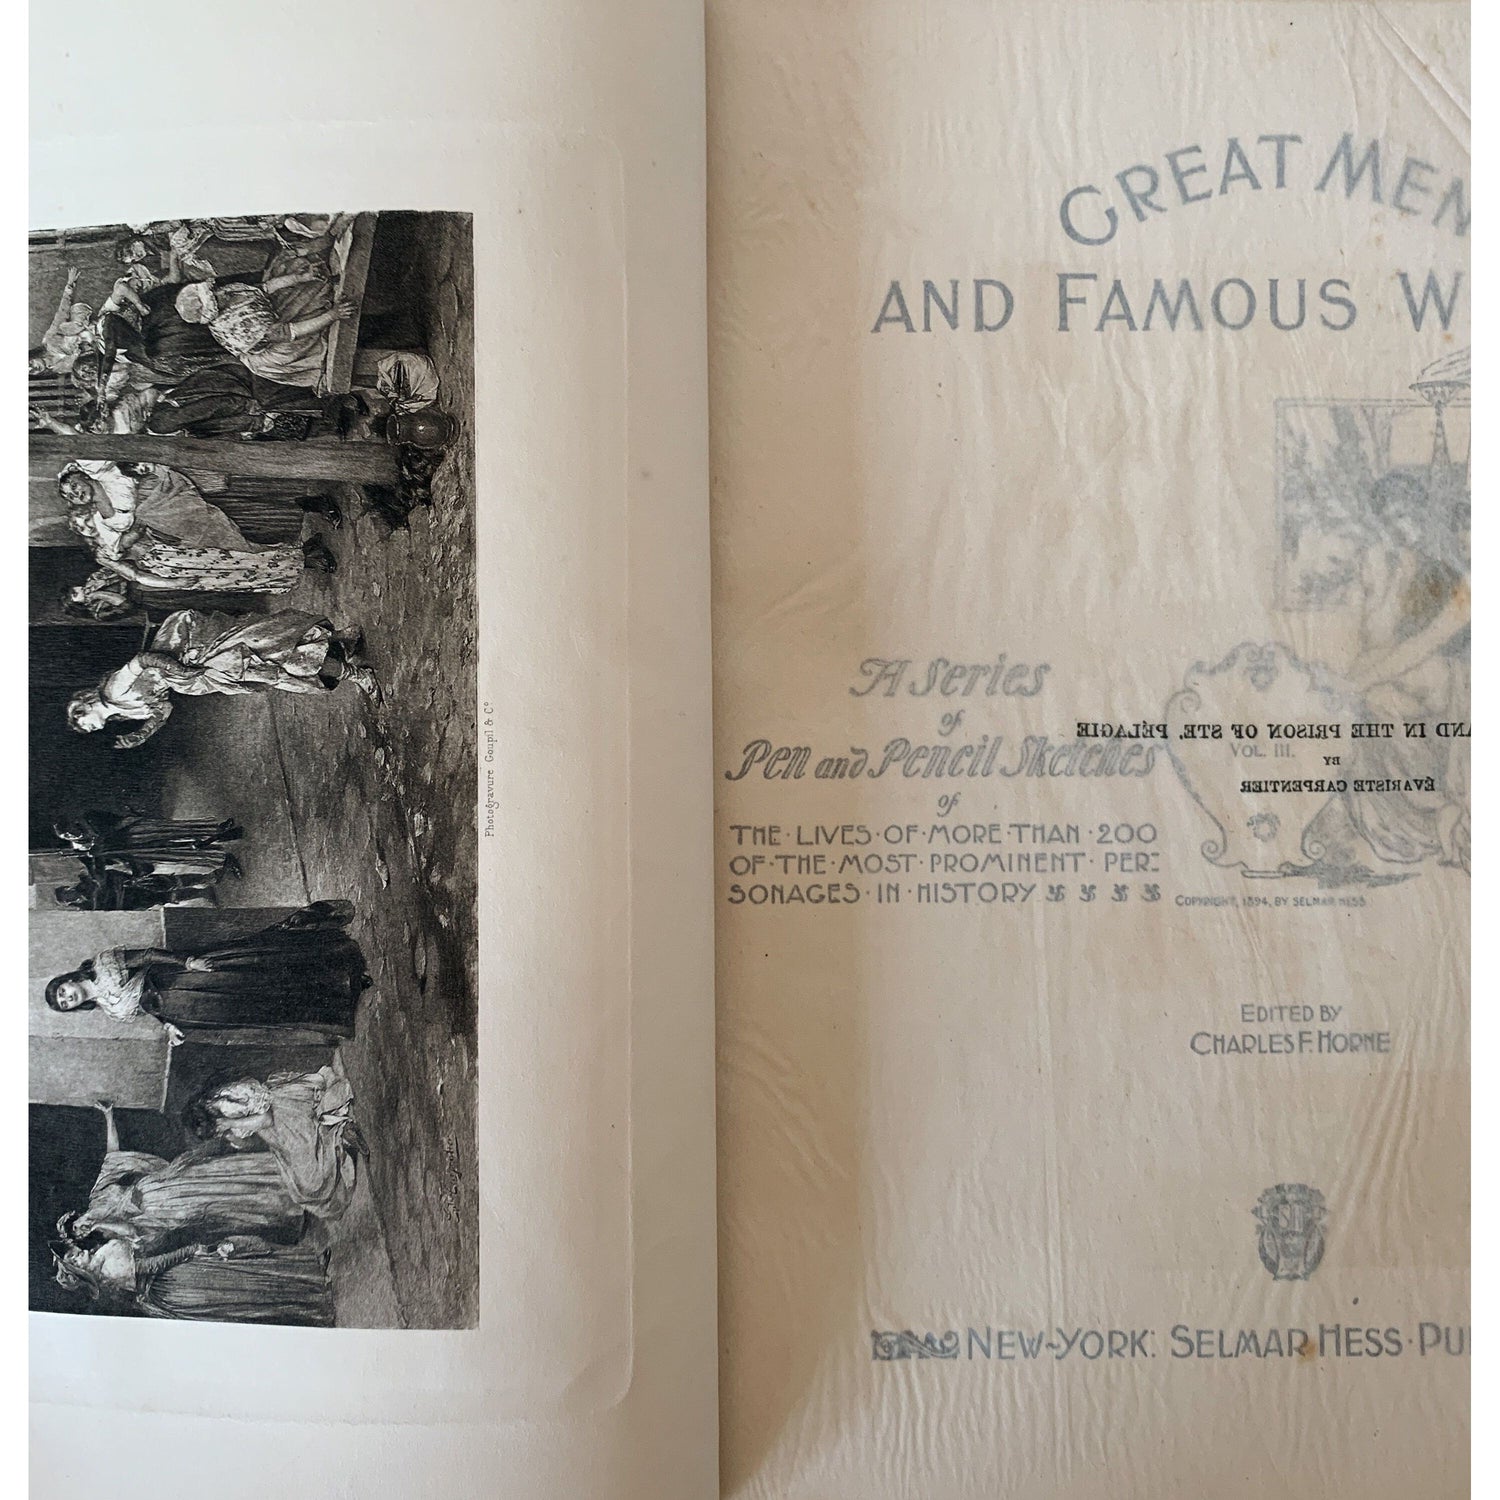 Great Men and Famous Women, 1894 Antique Oversized Ornate Book Set, Illustrated